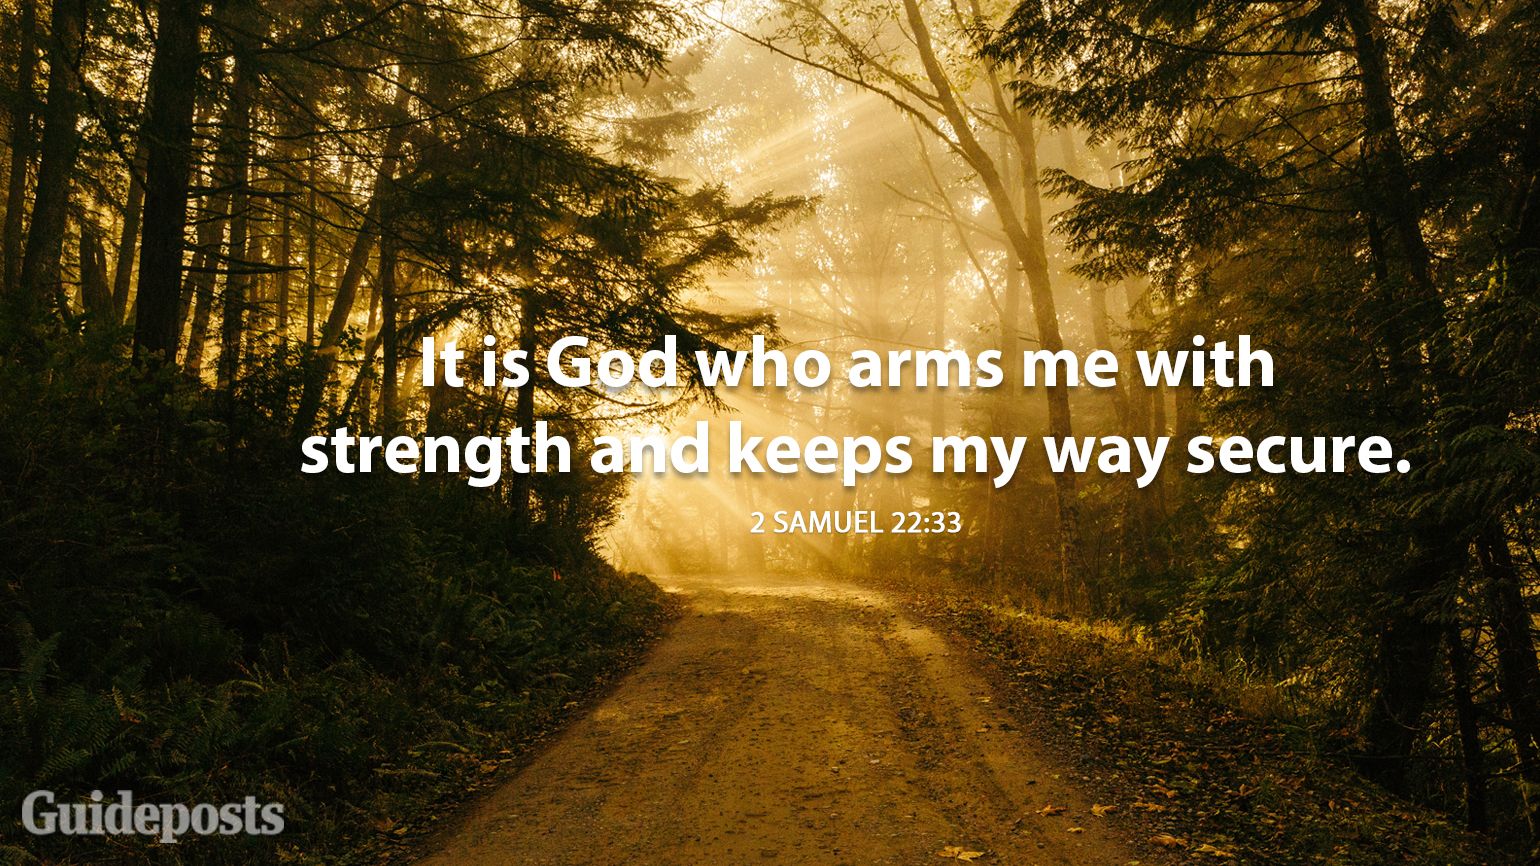 It is God who arms me with strength and keeps my way secure